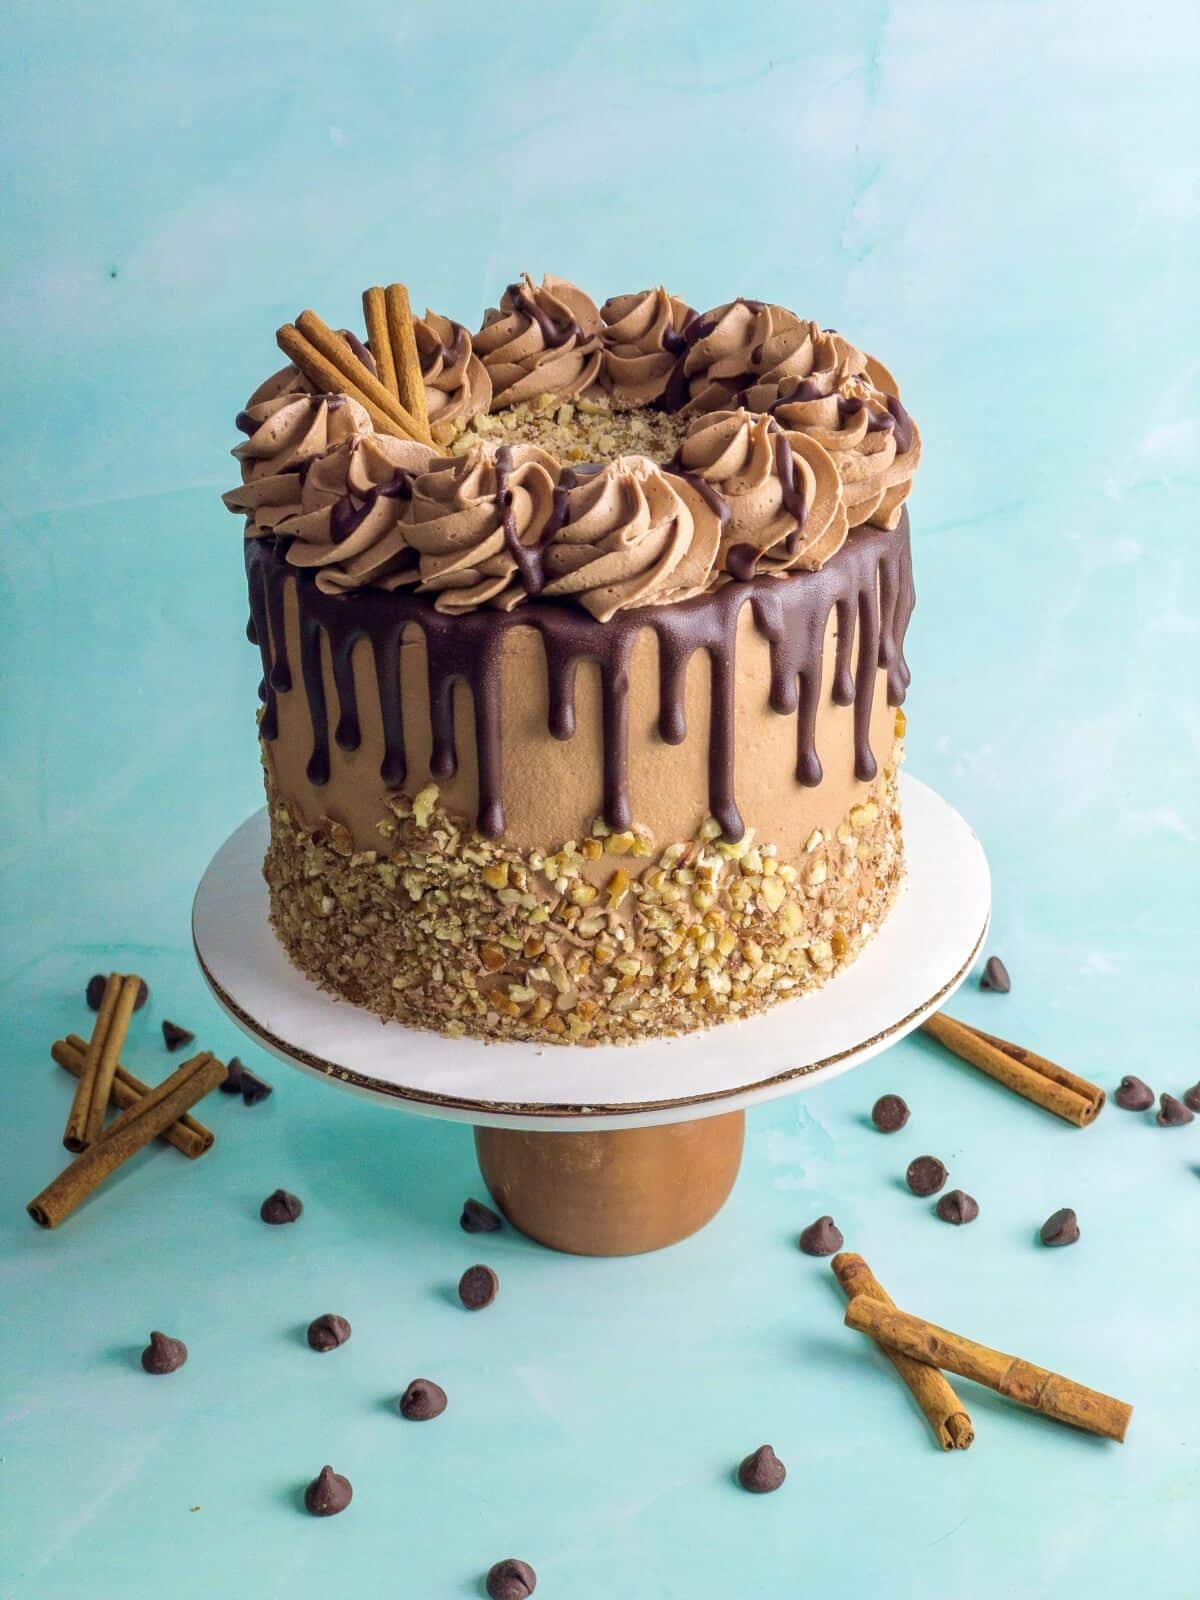 an image of an uncut chocolate cinnamon drip cake with pecans around the edges and chocolate ganache drizzle down the sides of the cake. On a cake pedistal with chocolate chips and cinnamon sticks on the table